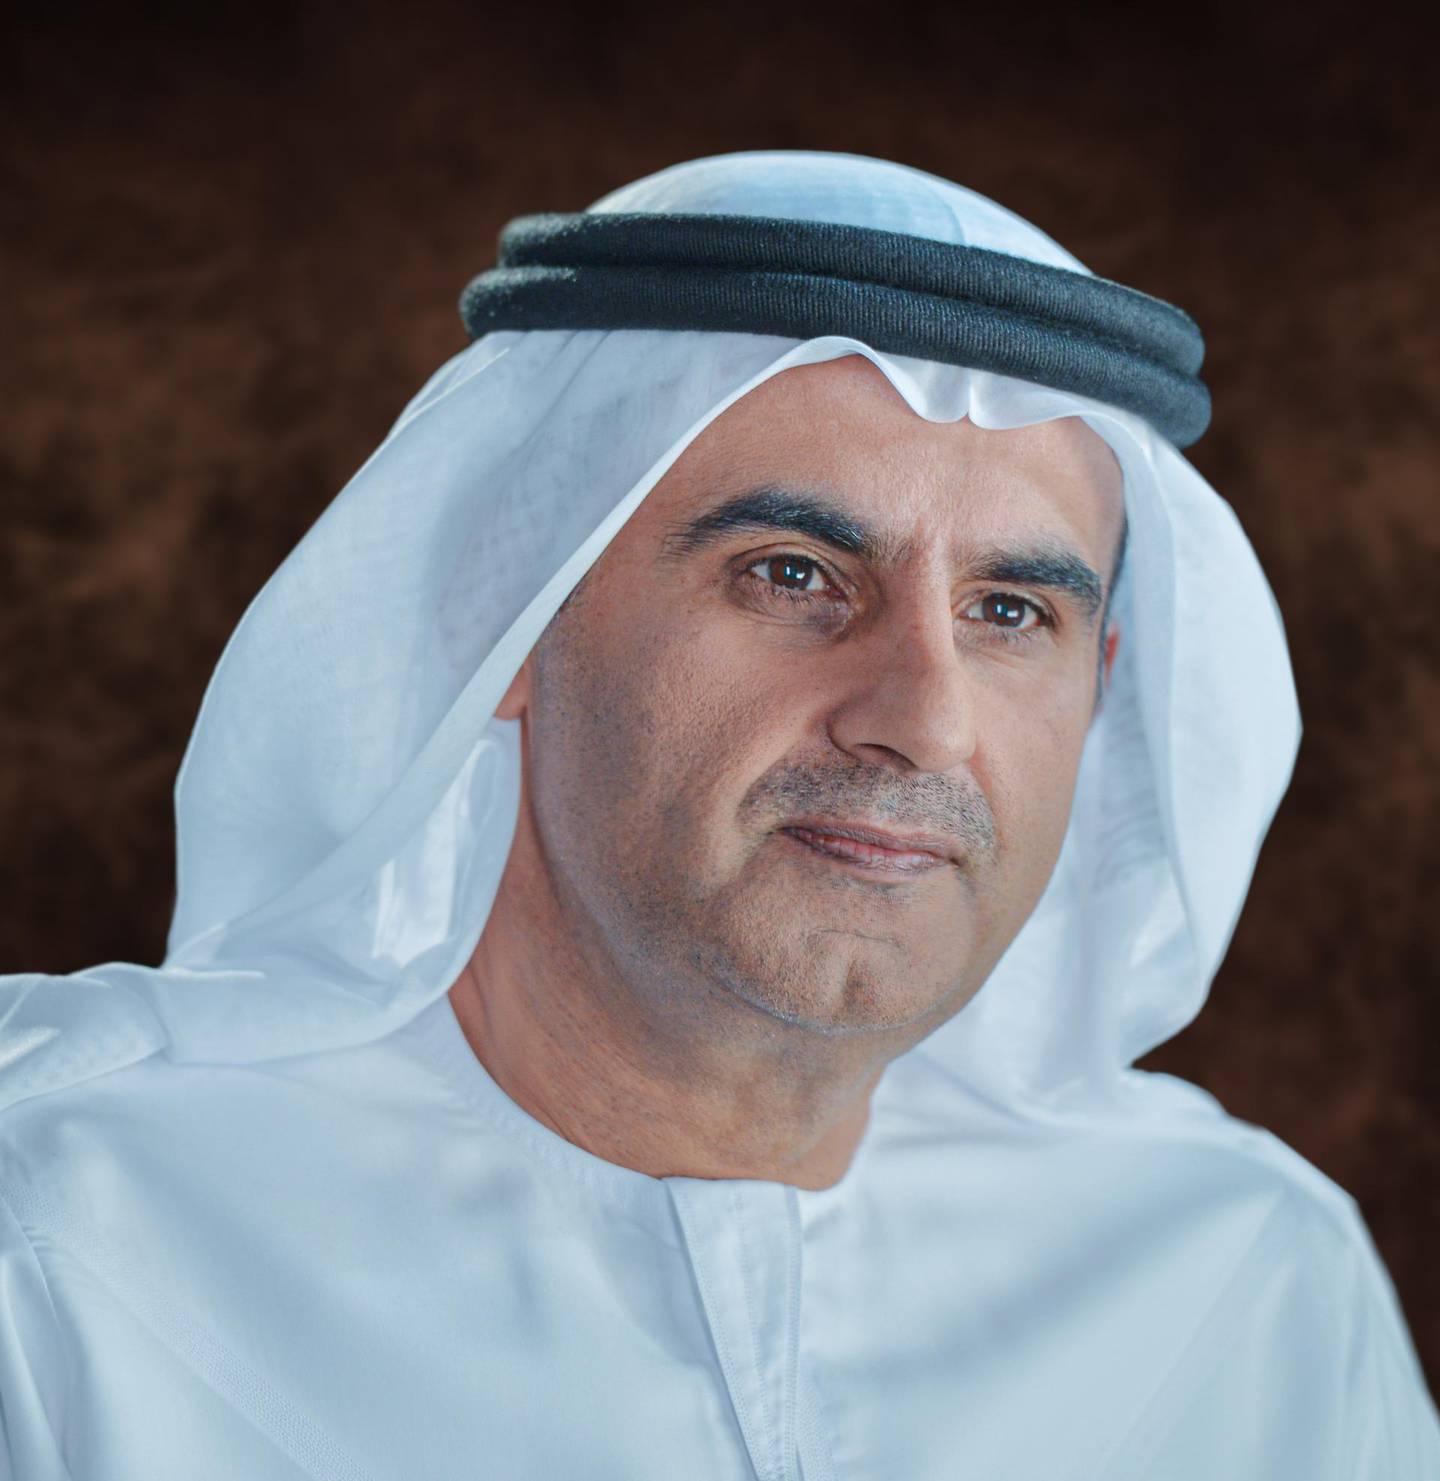 Dr Ali bin Tamim, chairman of the Abu Dhabi Arabic Language Centre. Courtesy Department of Culture and Tourism - Abu Dhabi